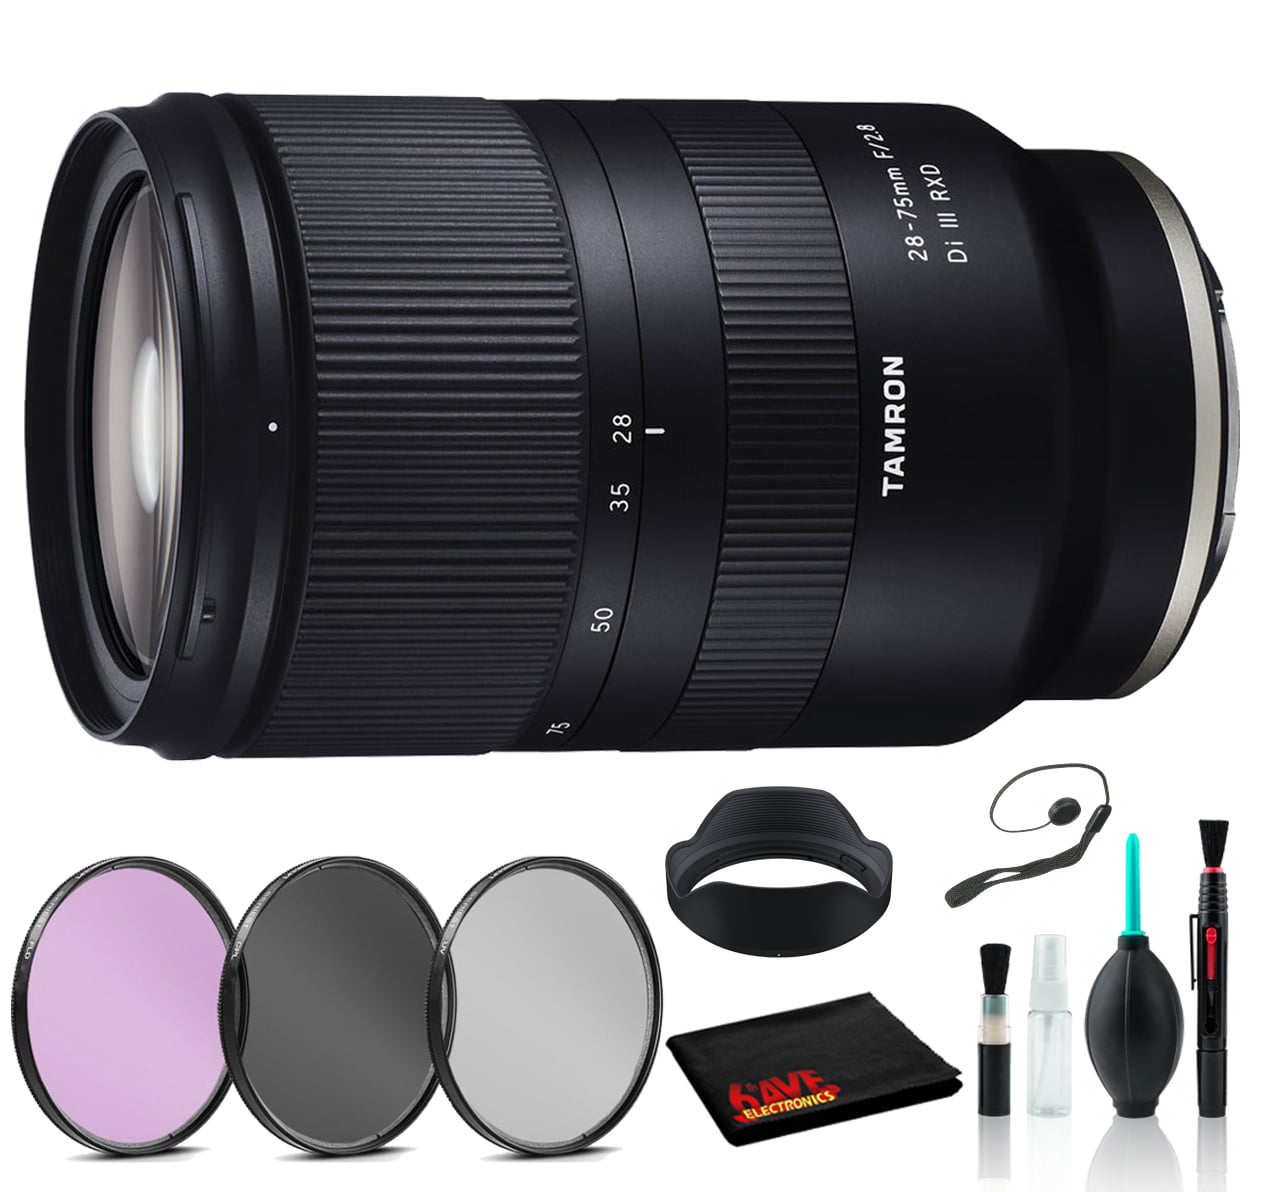 Tamron 28-75mm f/2.8 Di III RXD Lens for Sony E Advanced Bundle - 3pc